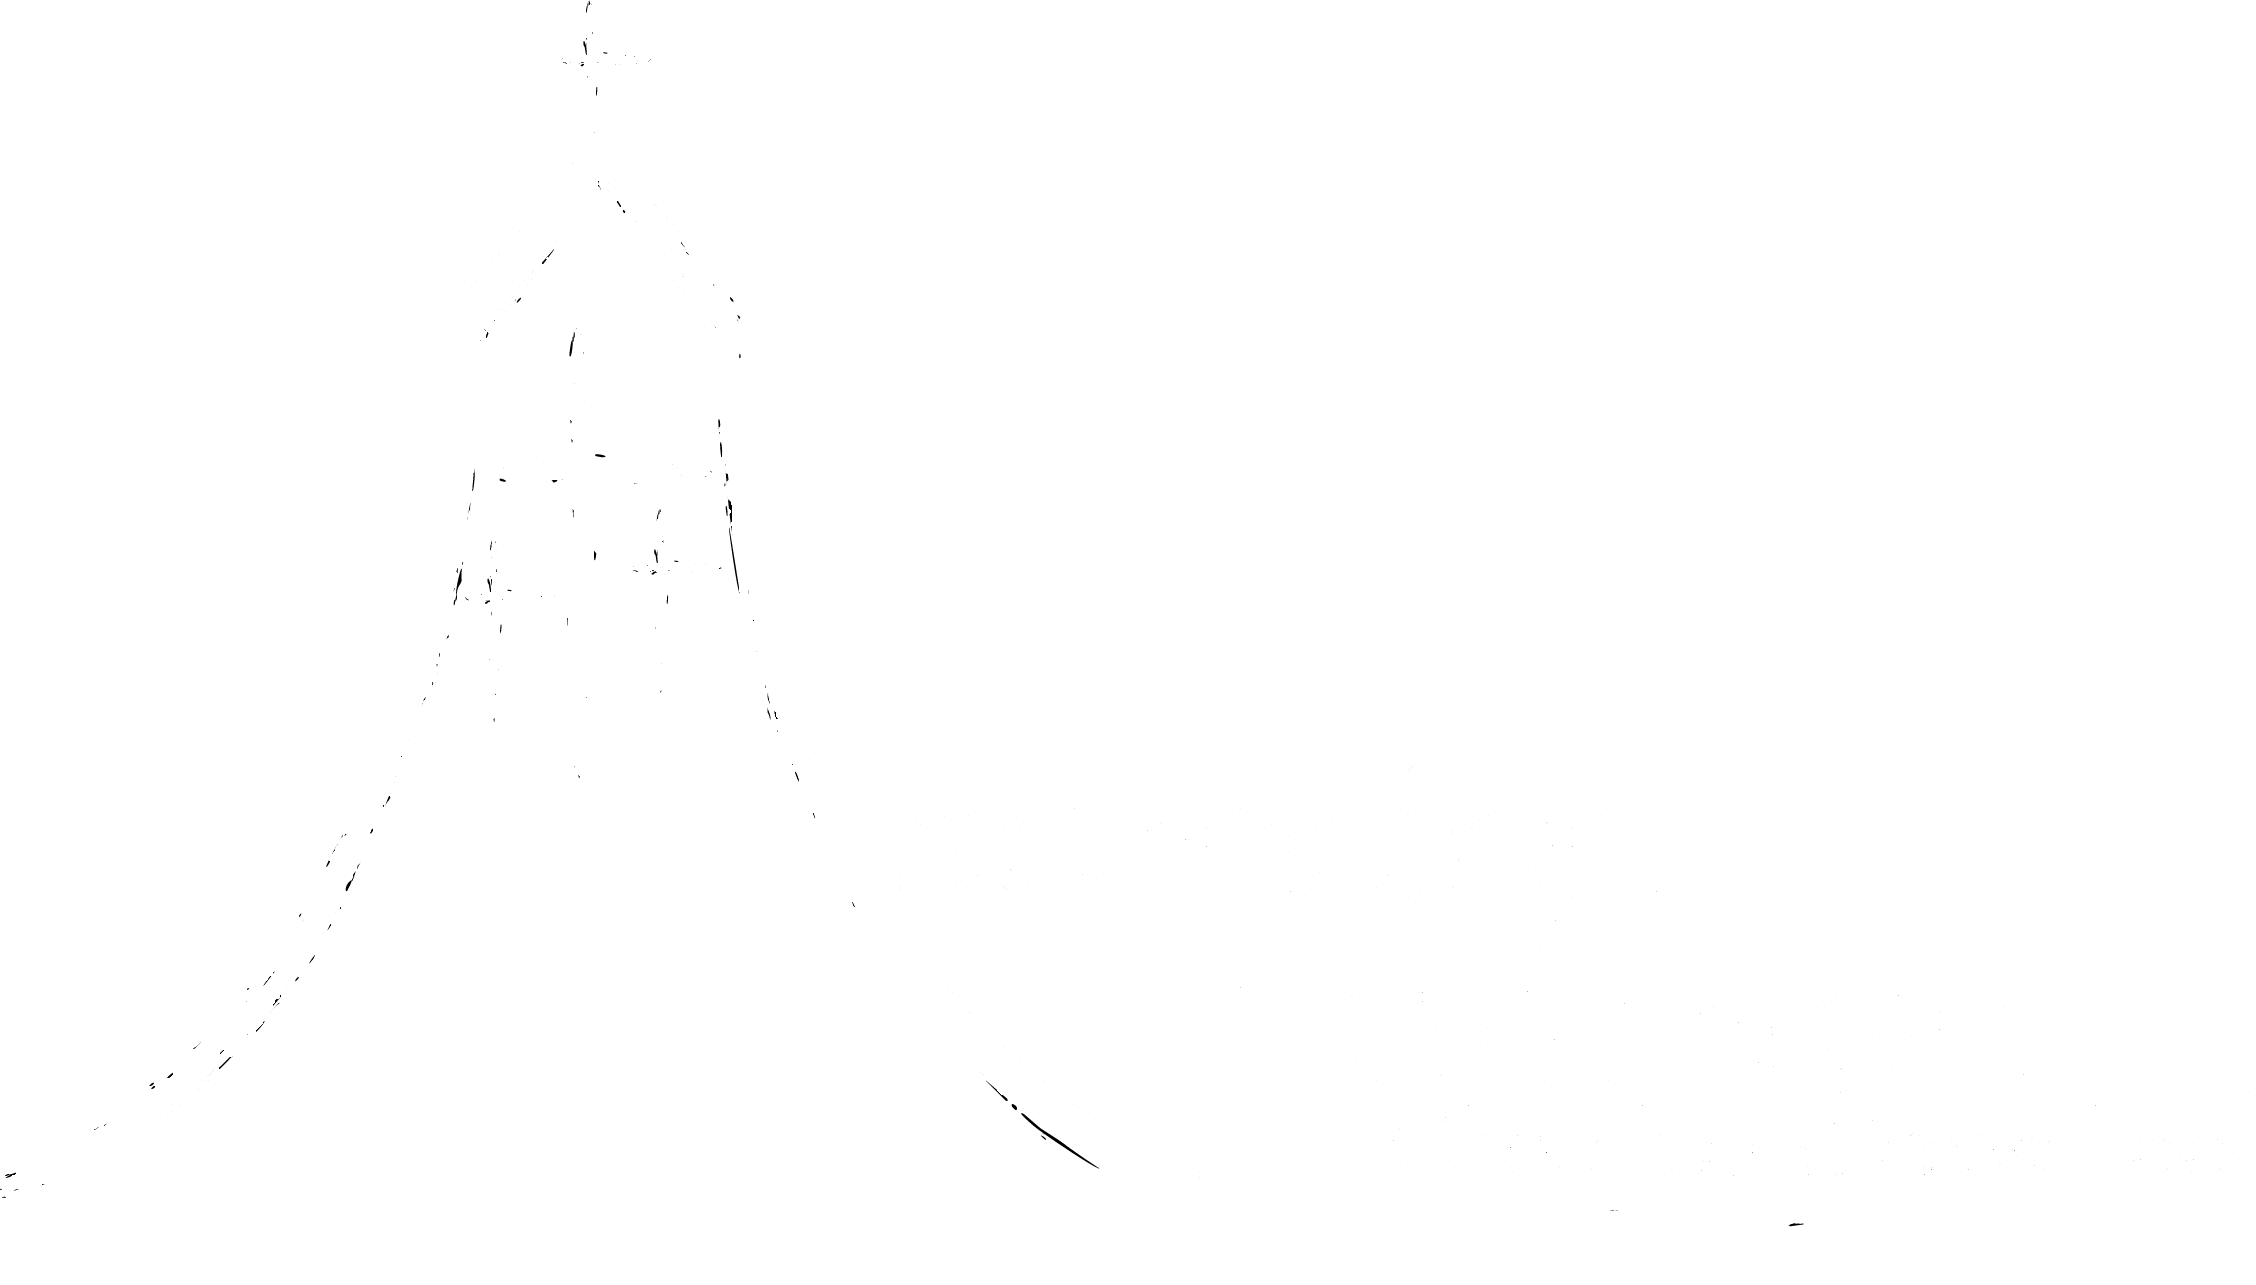 Ascension Lutheran Church and Preschool